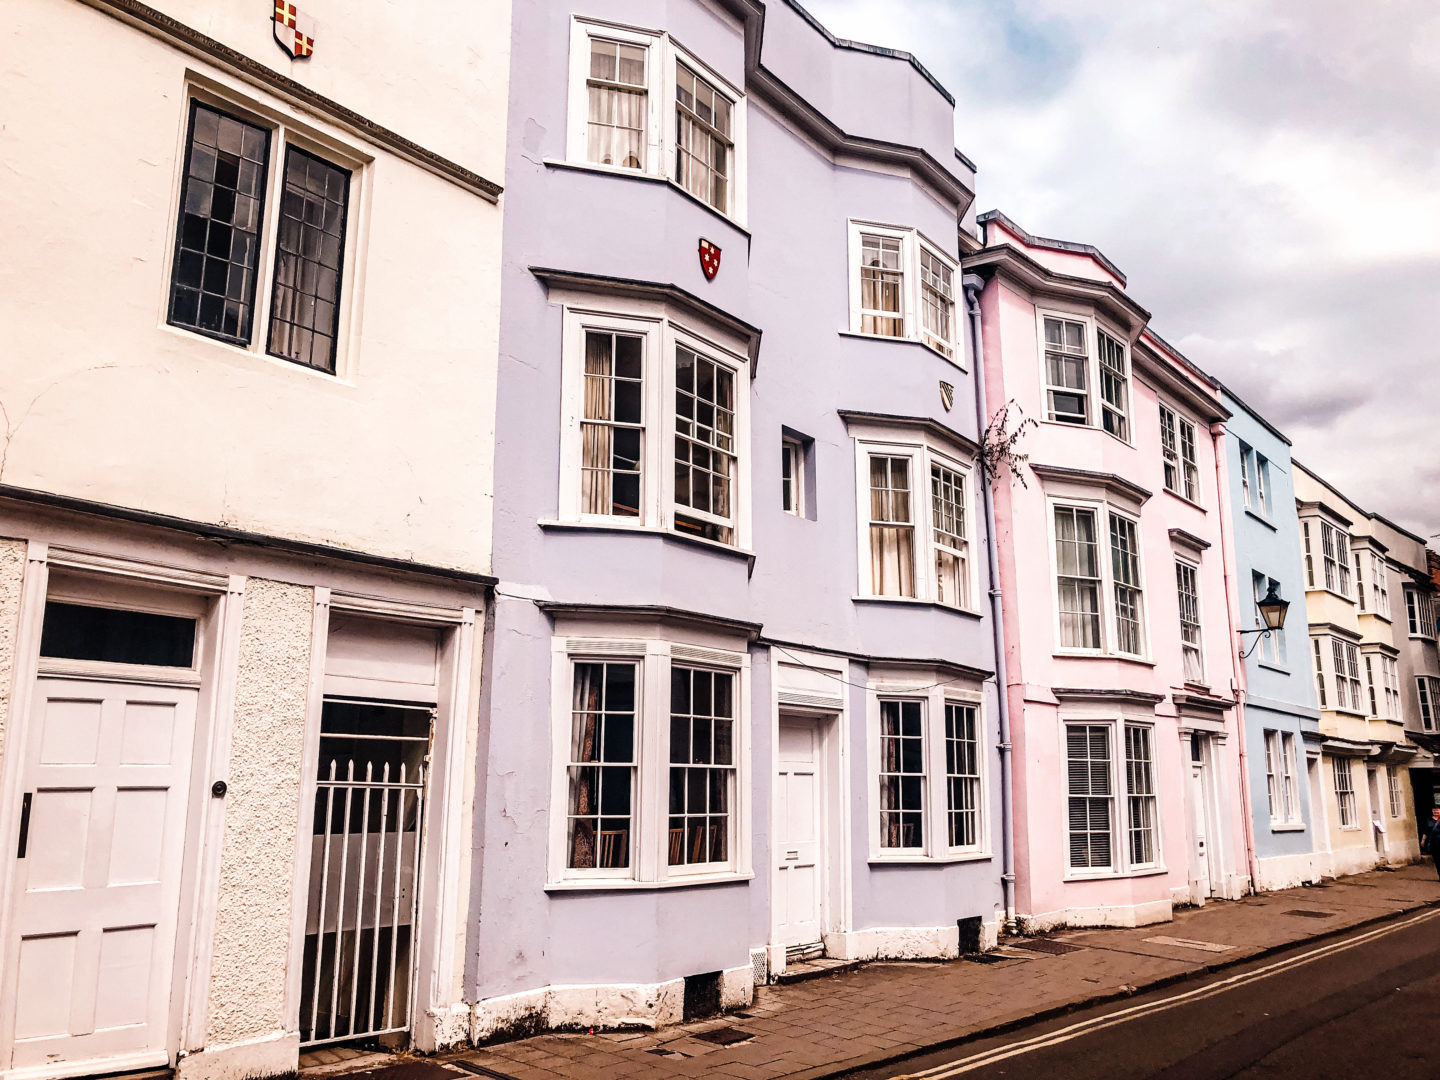 Line of colourful houses - beige, lavender, pink, blue, light yellow,on Holywell Street in Oxford